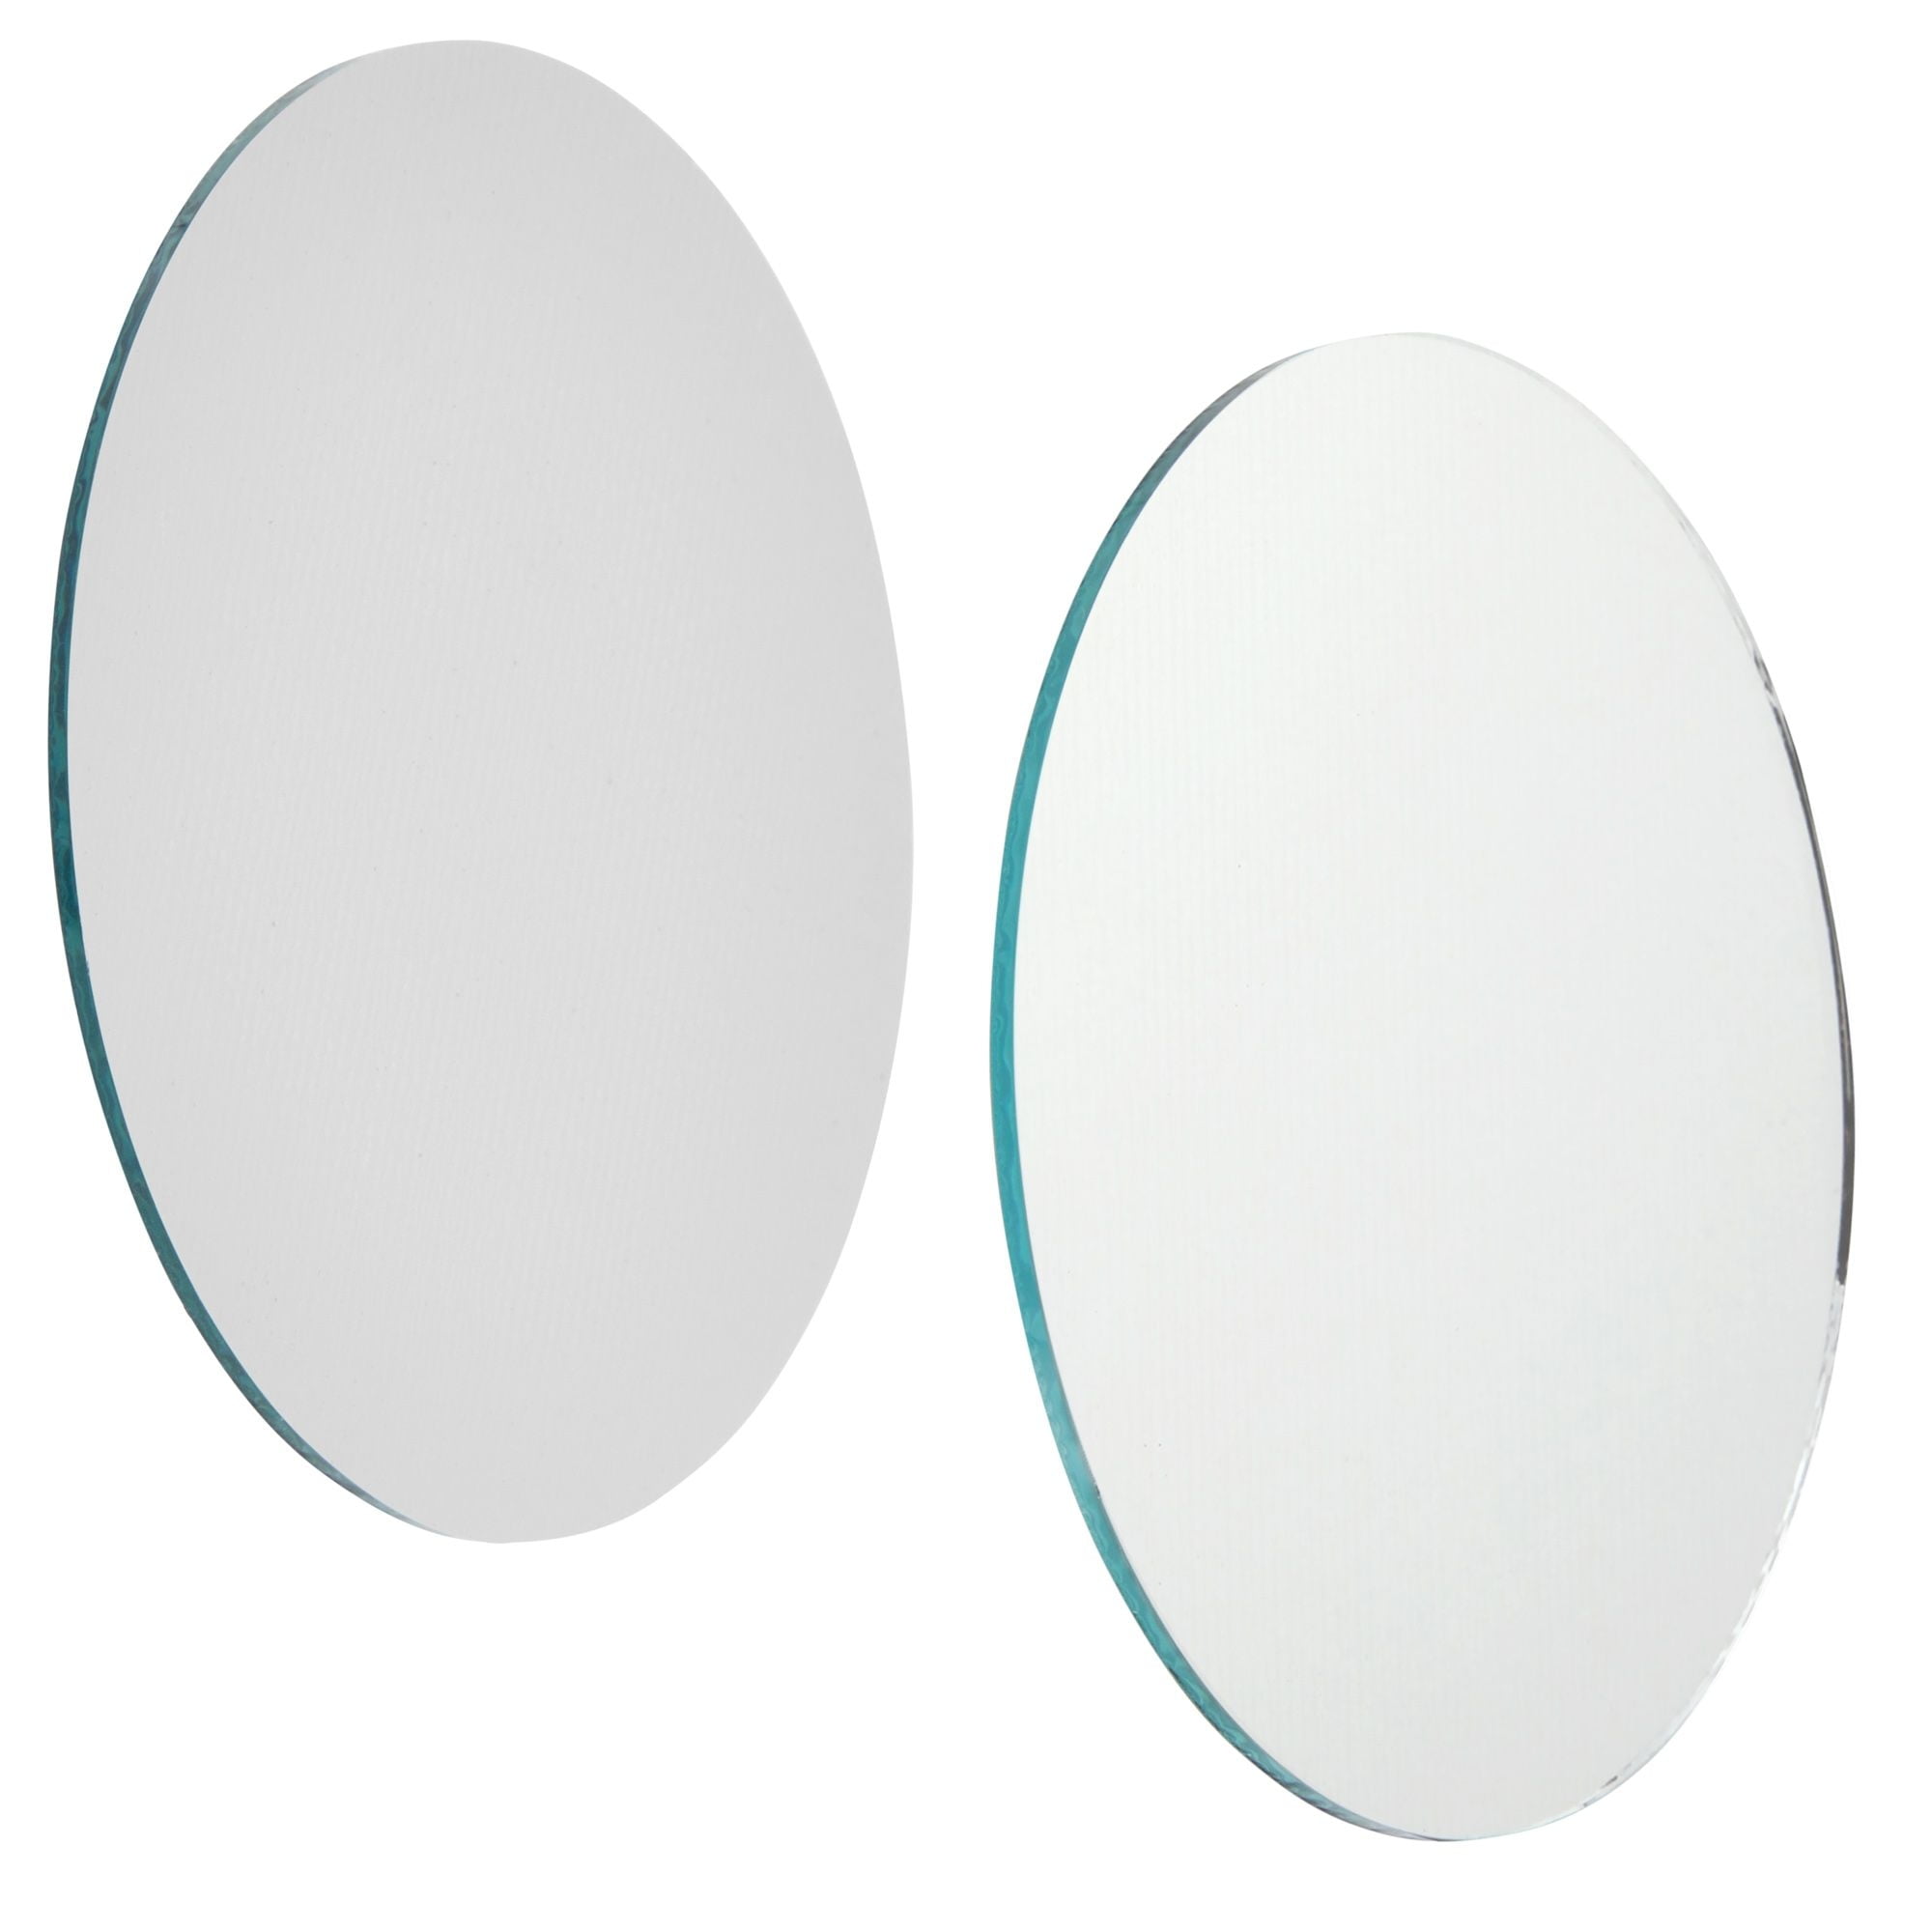 50 Pack Small Round Mirrors for Crafts, 3-Inch Tile Circles for